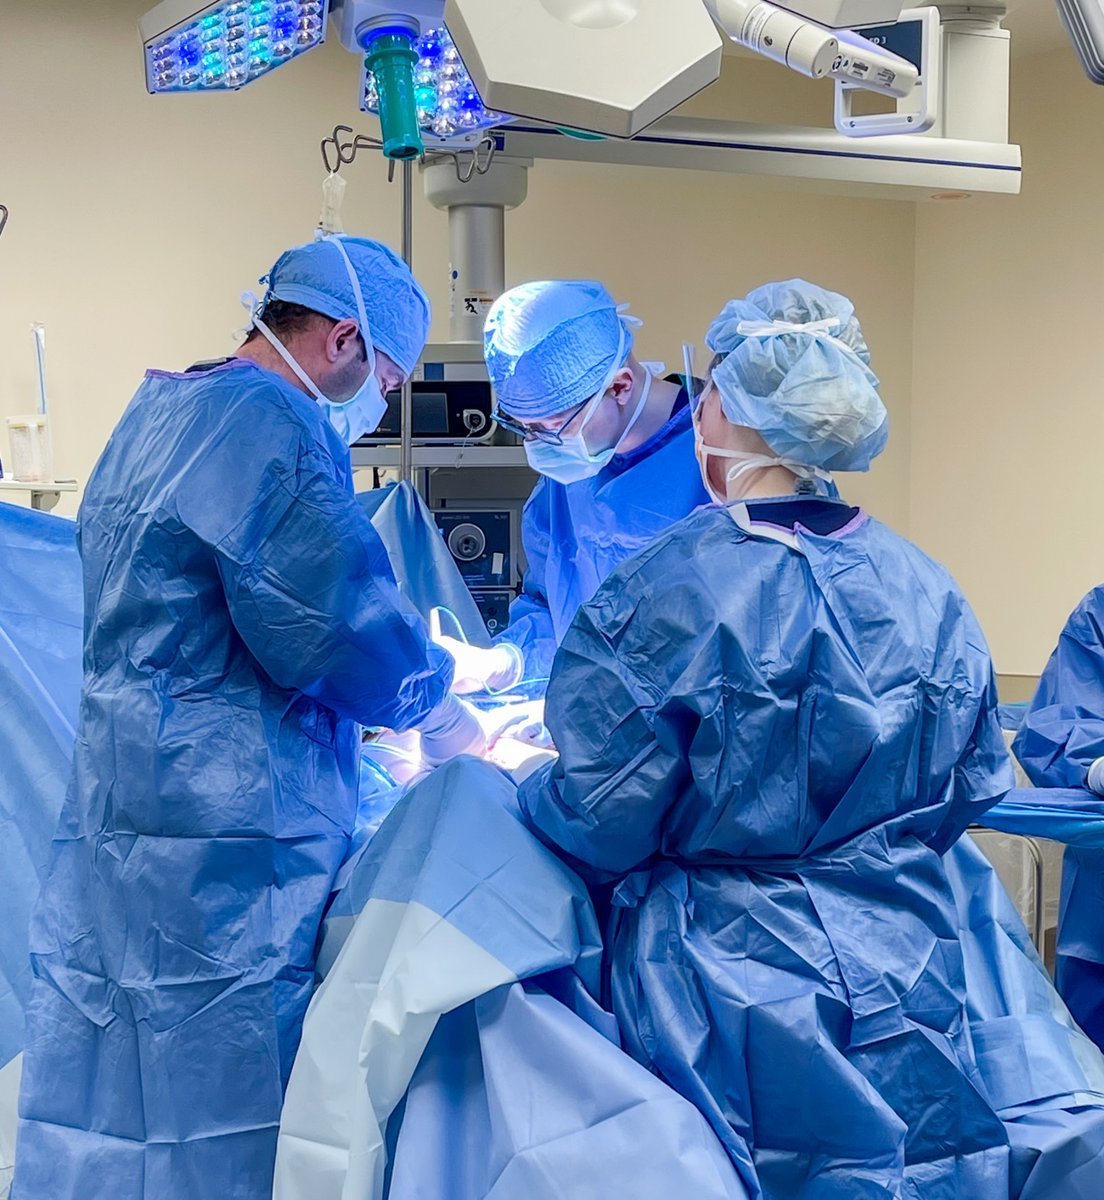 Did you know that at #UTSWSurgery we treat a variety of colorectal diseases including cancer, inflammatory bowel disease, diverticular disease, and pelvic floor issues?